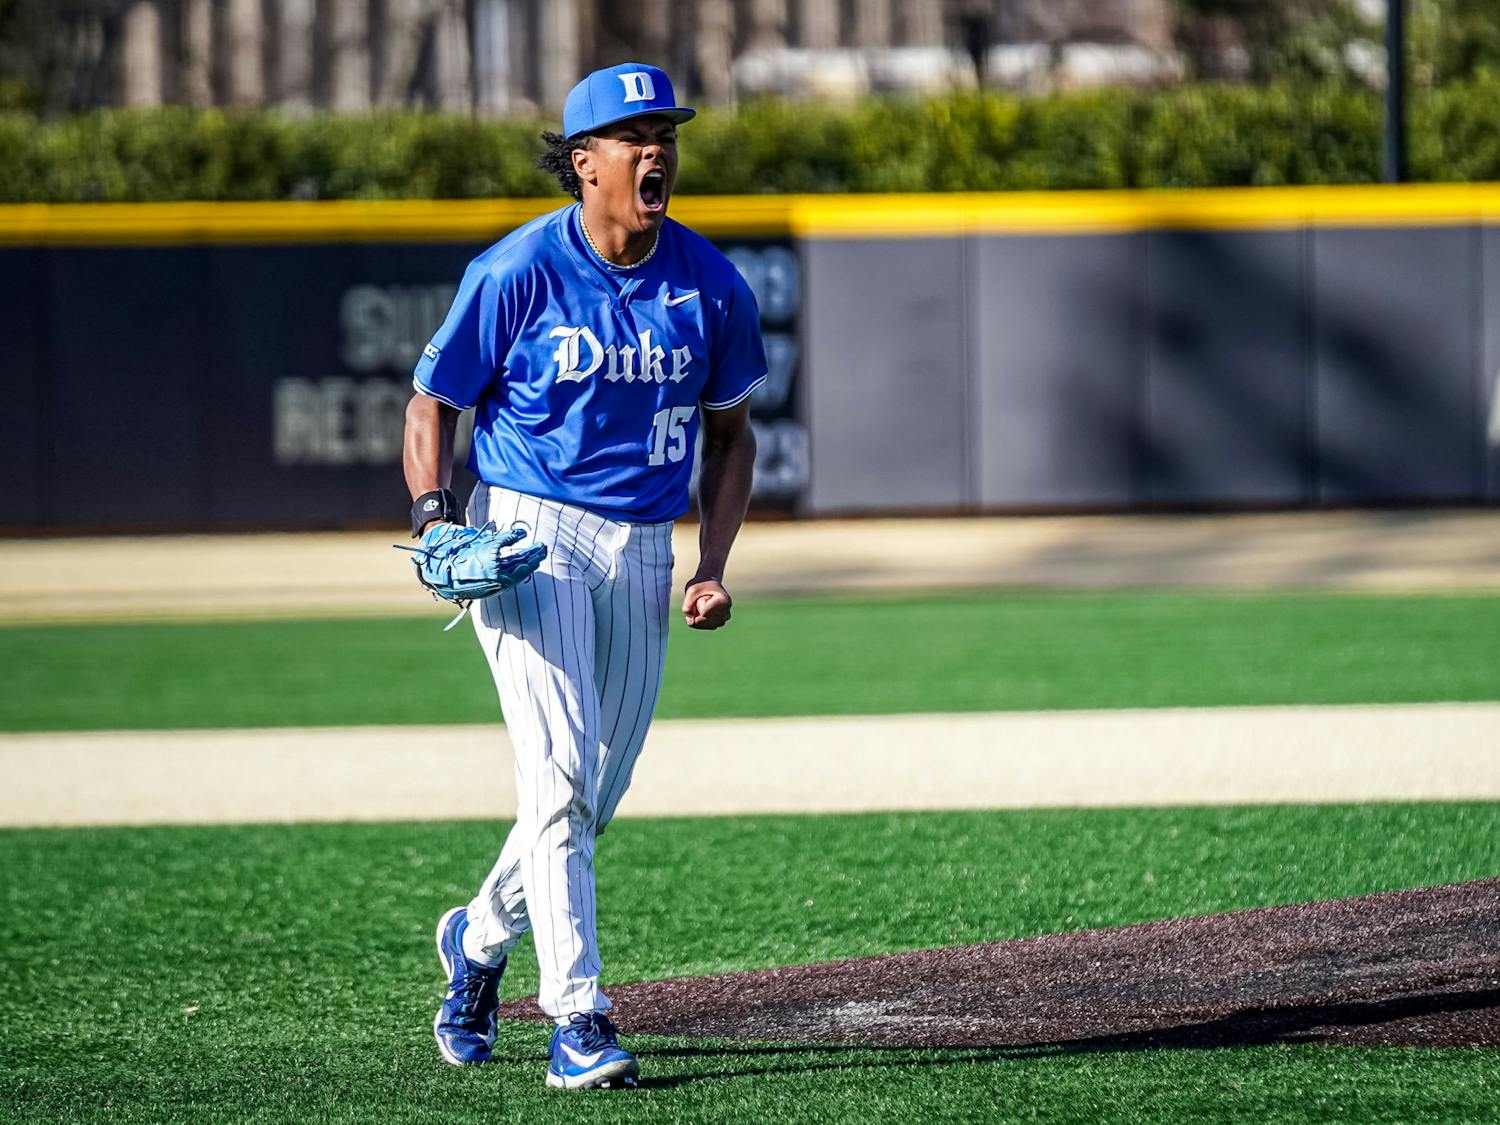 Freshman pitcher Kyle Johnson celebrates as he leaves the mound during Duke's upset of Wake Forest.